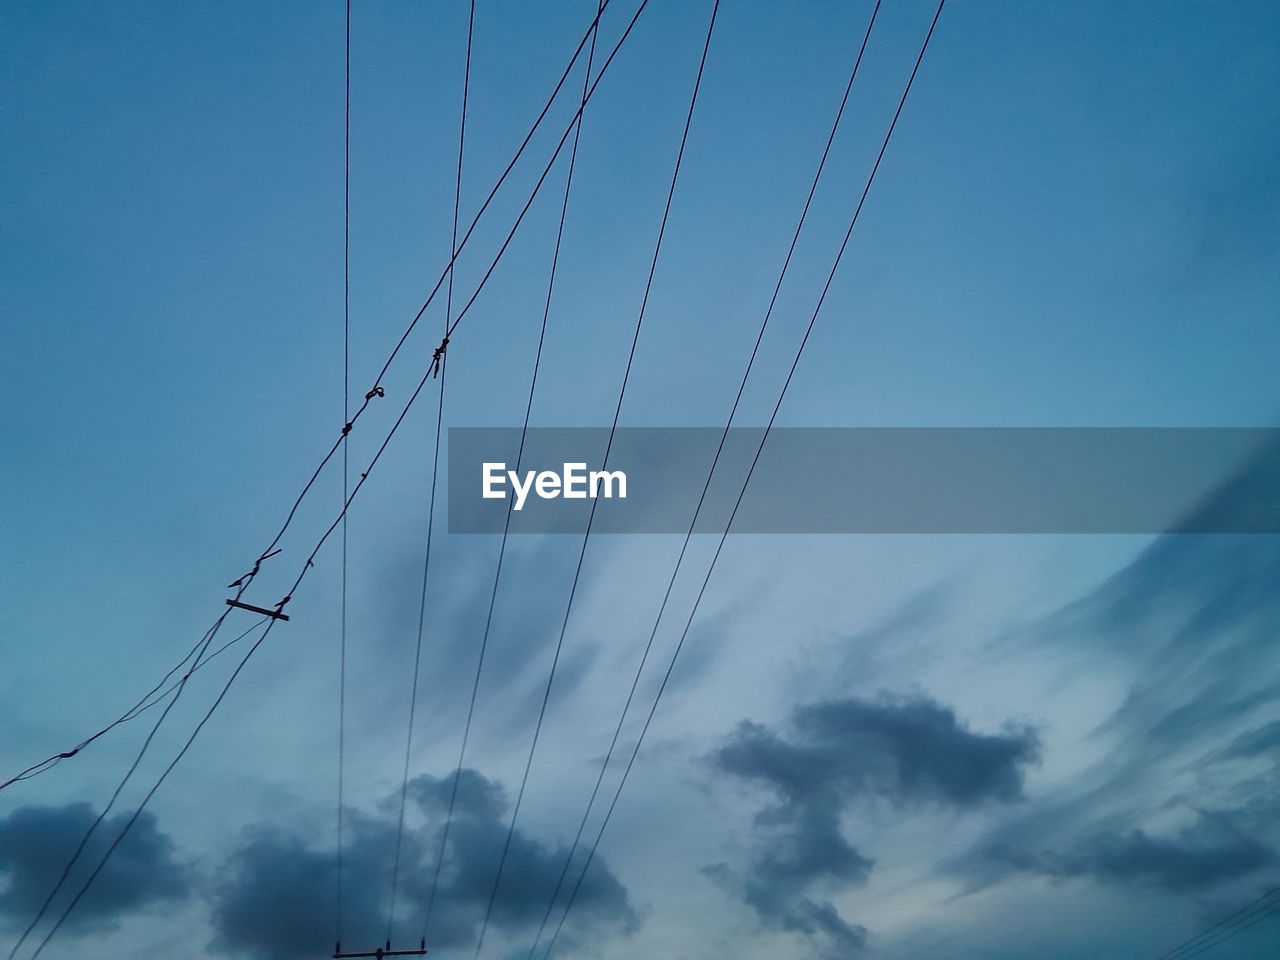 sky, blue, cloud, cable, line, nature, electricity, no people, low angle view, technology, transportation, outdoors, day, overhead power line, power line, power supply, power generation, mast, wind, mode of transportation, electrical supply